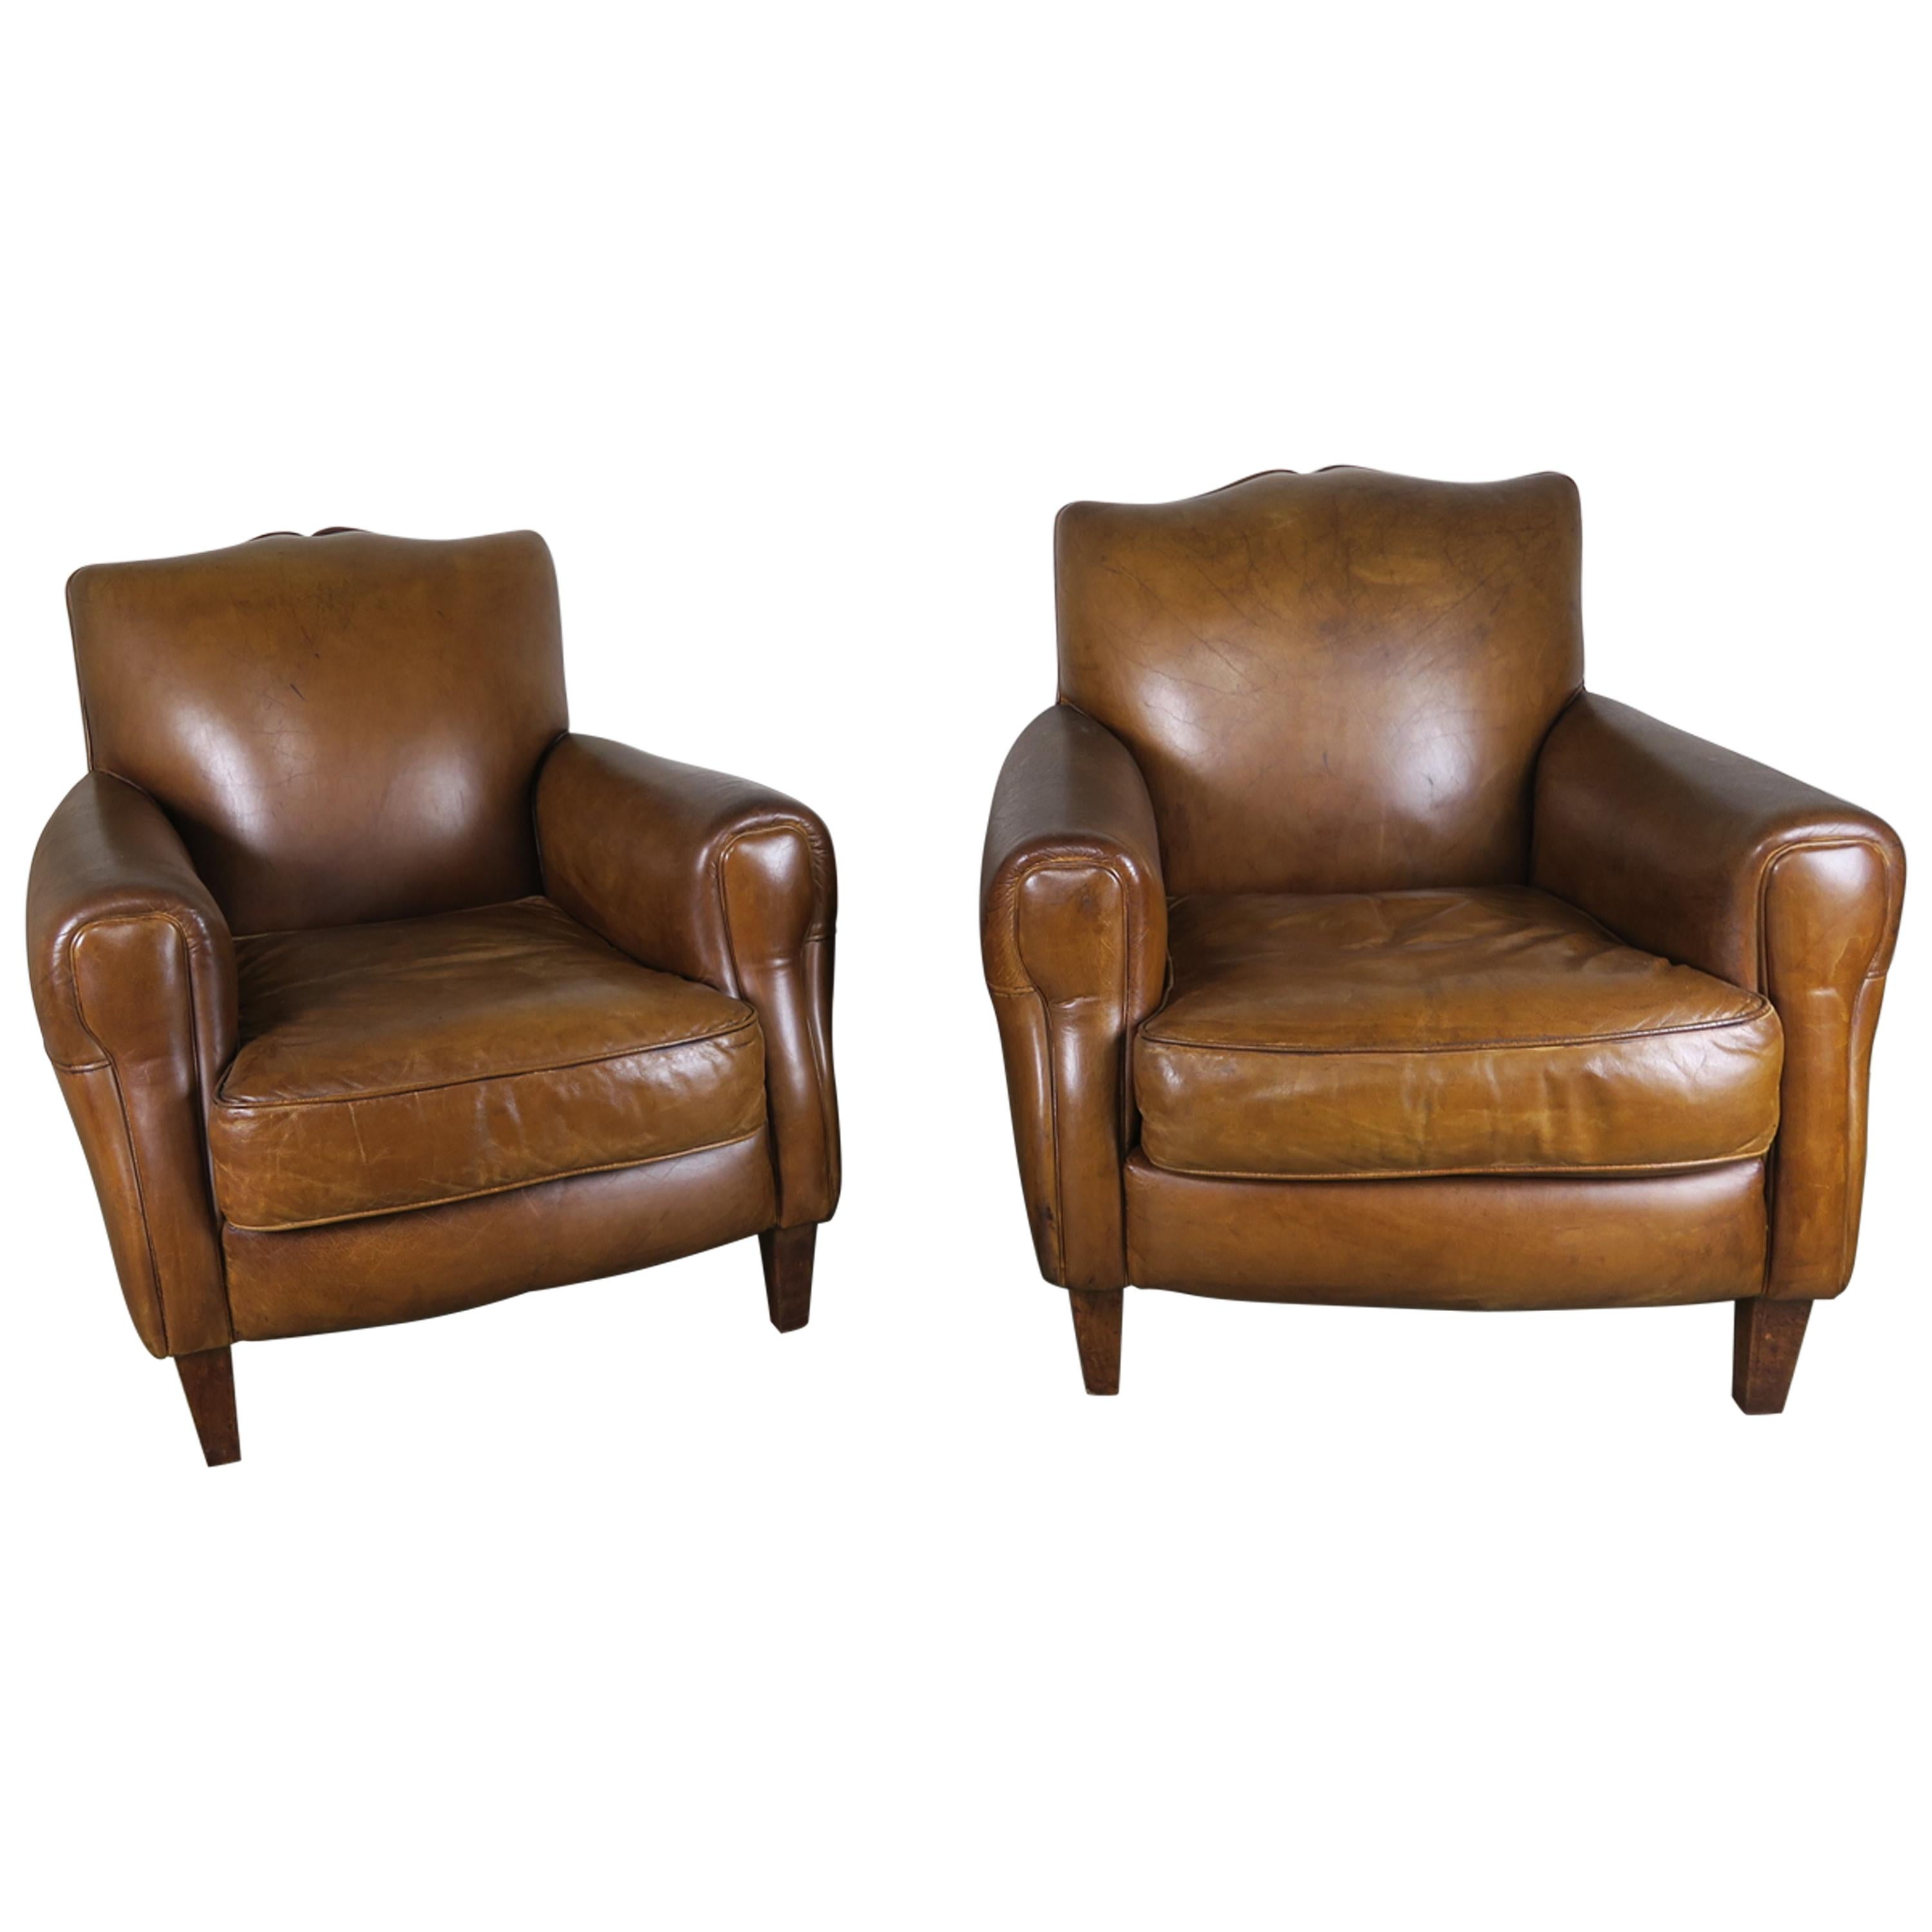 French Deco Style Mustache Shaped Leather Armchairs, circa 1930s, Pair